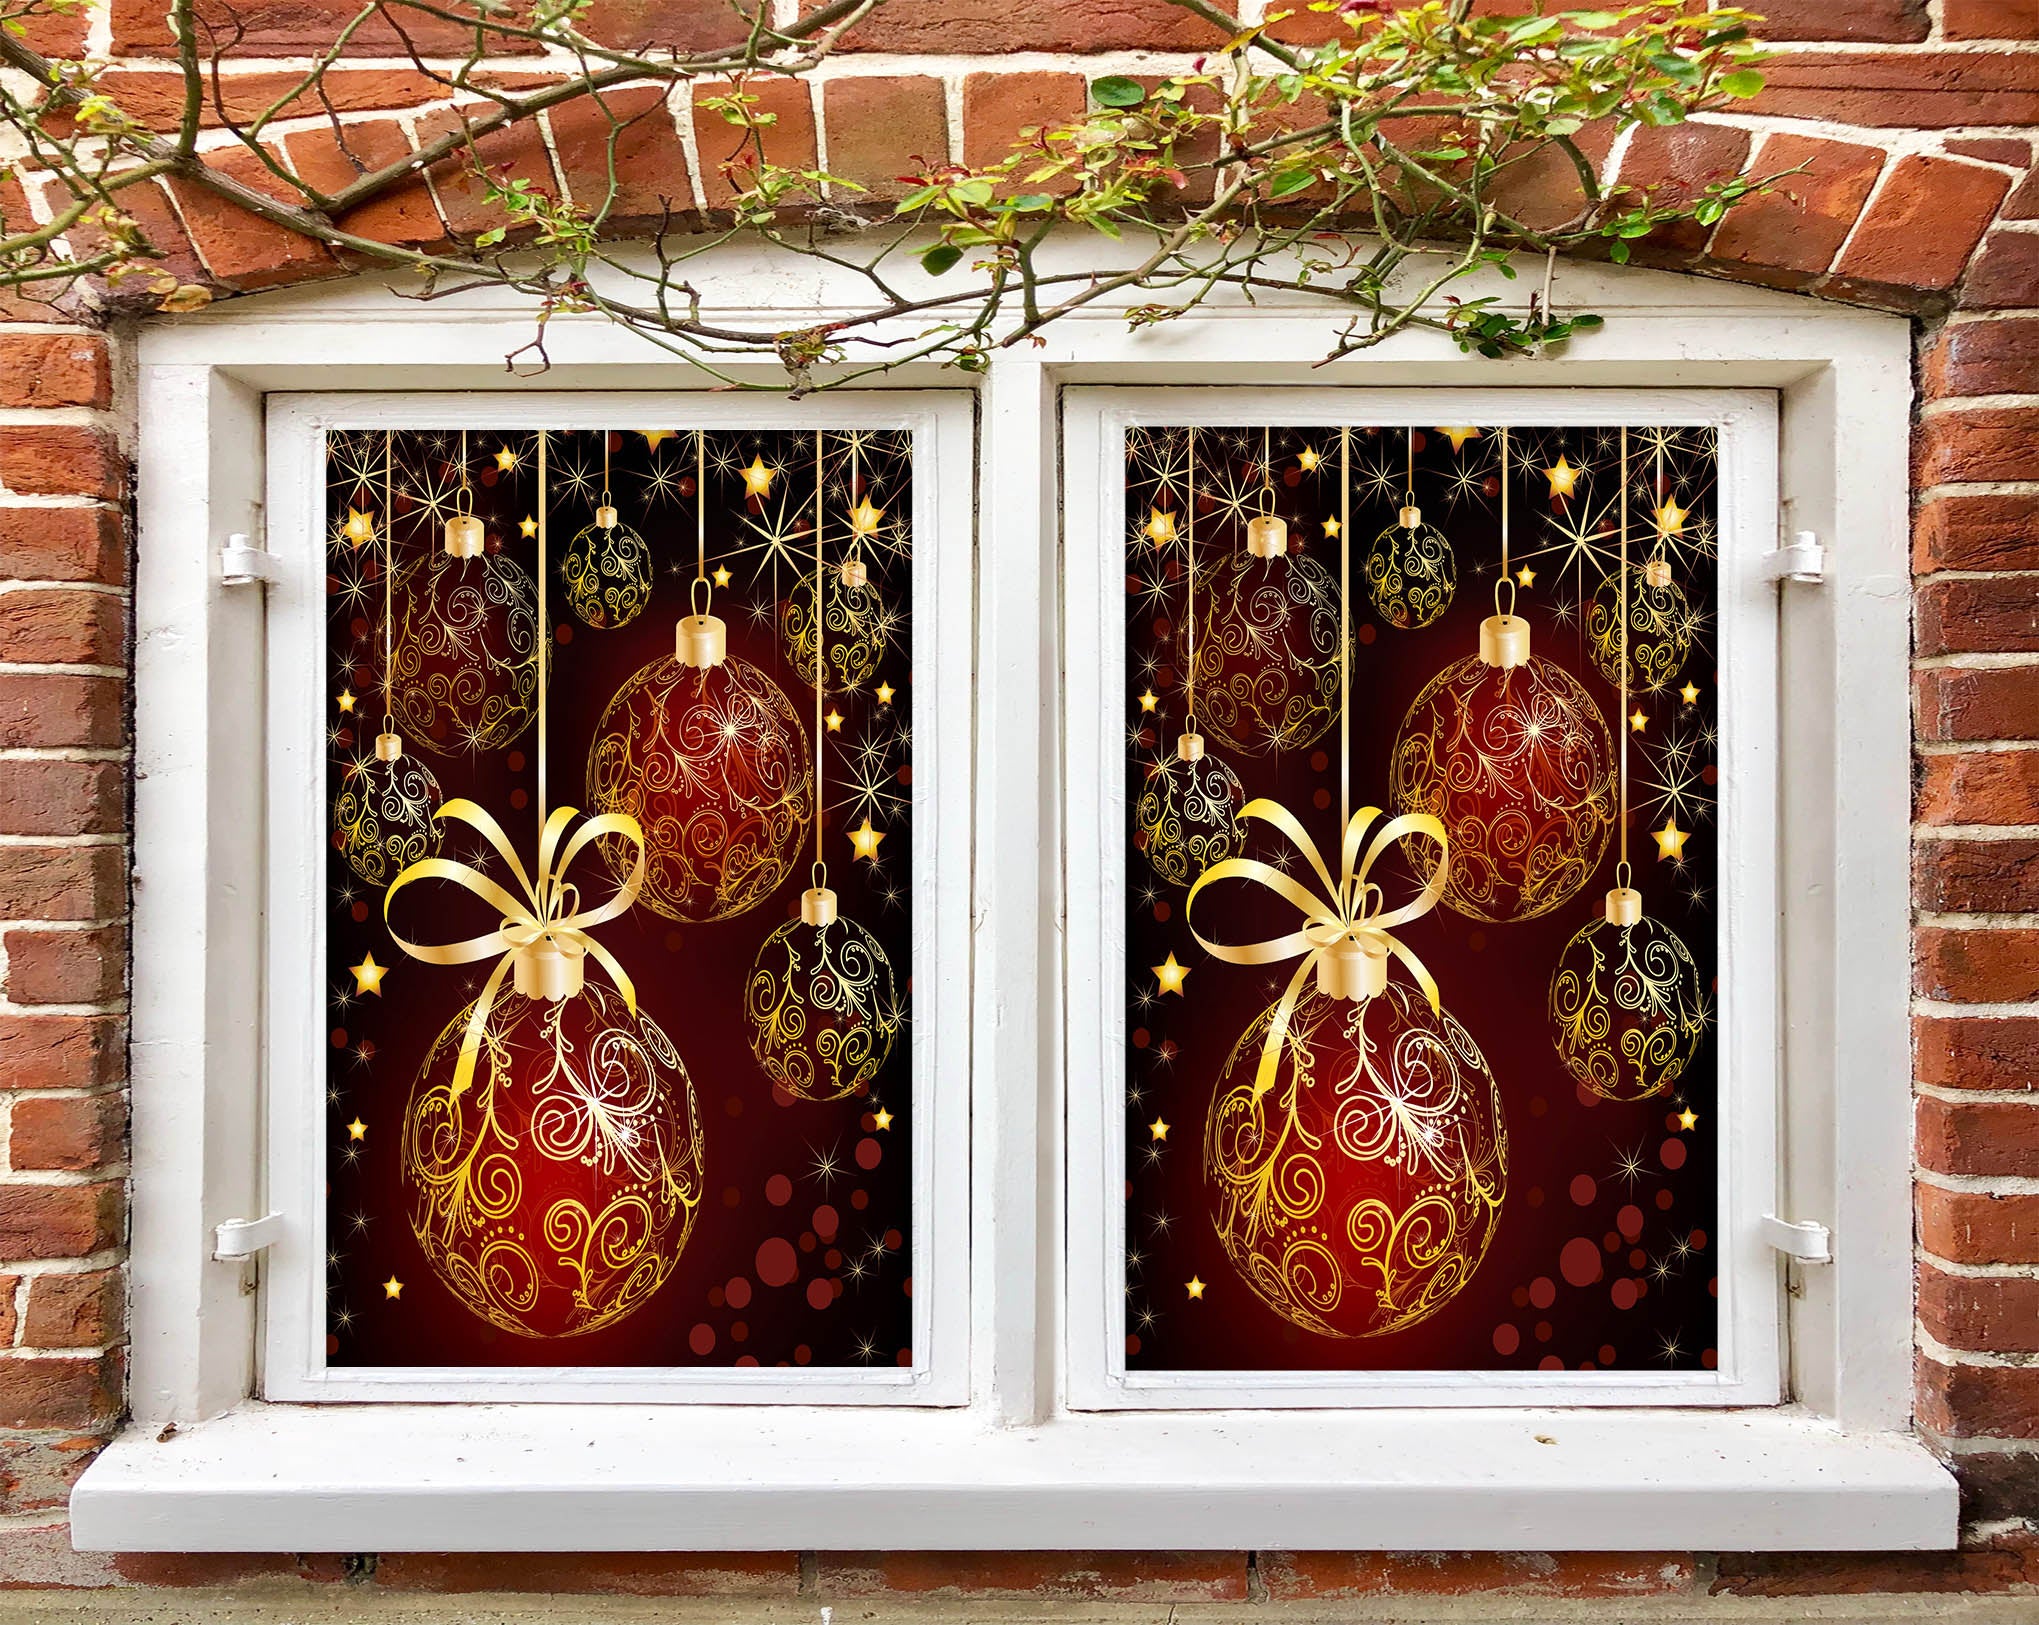 3D Golden Ball 31005 Christmas Window Film Print Sticker Cling Stained Glass Xmas